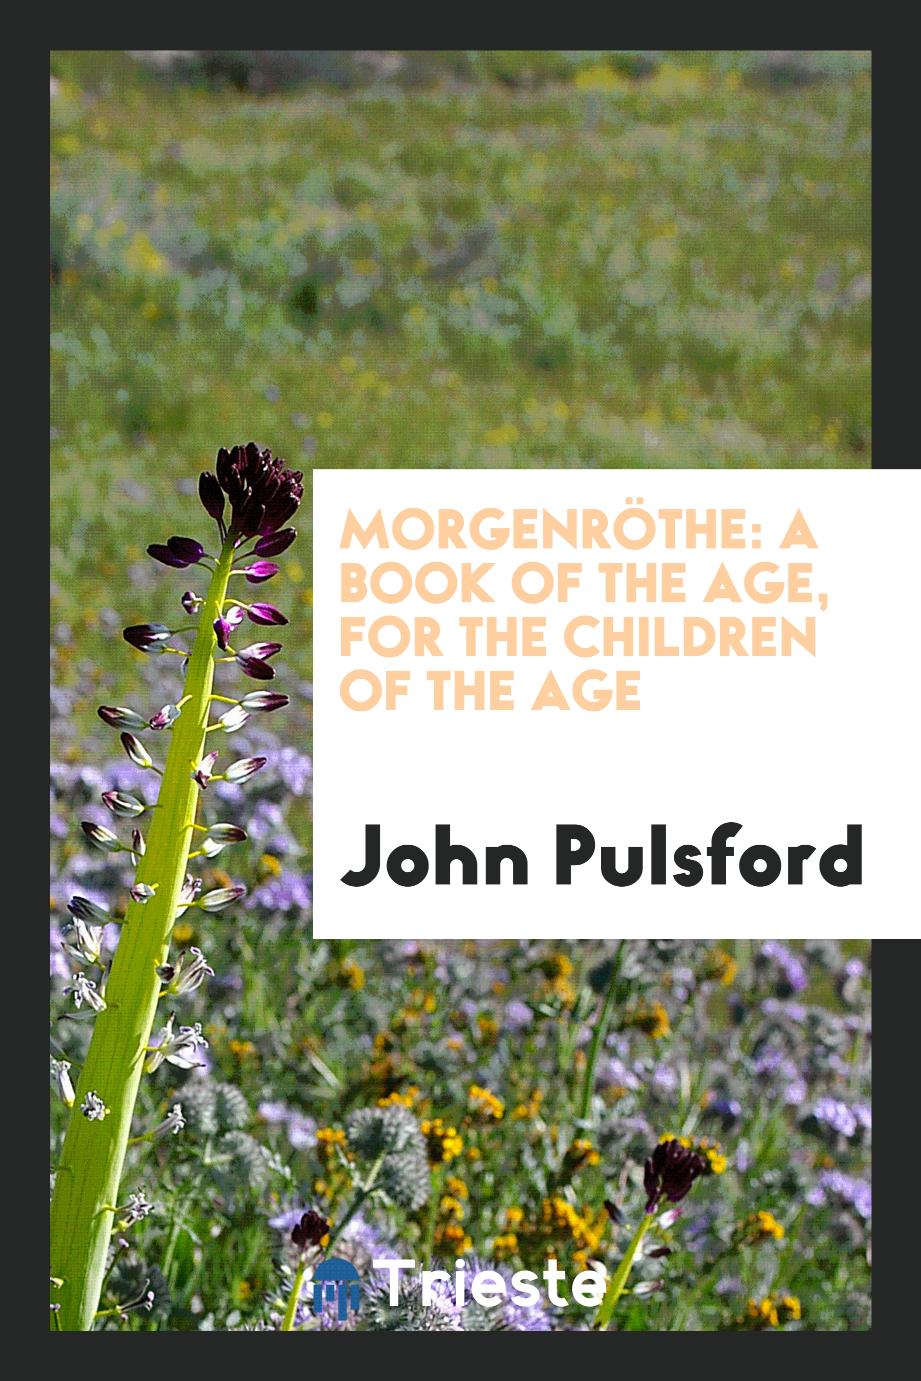 Morgenröthe: A Book of the Age, for the Children of the Age